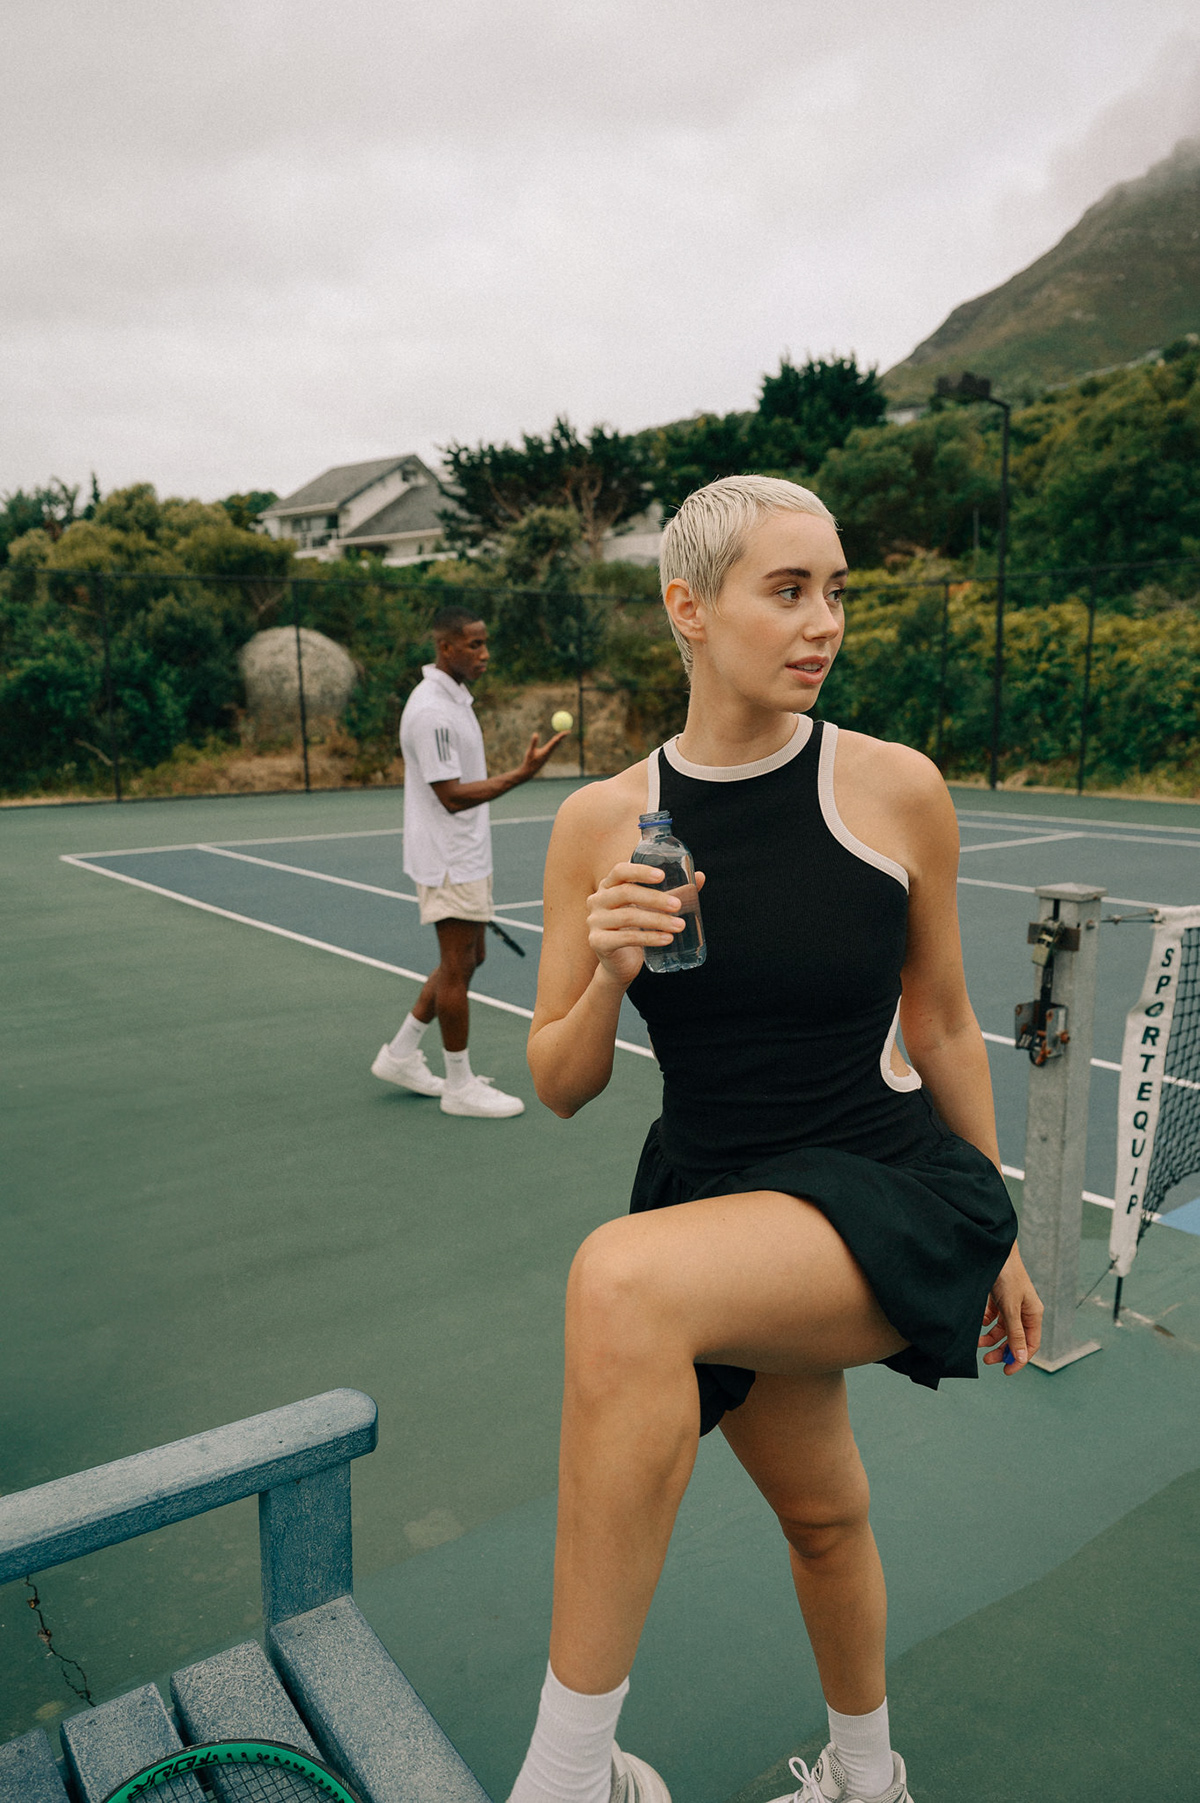 tennis activewear sports photography fashion photography editorial adidas Nike Asics Commercial Photography tennis court